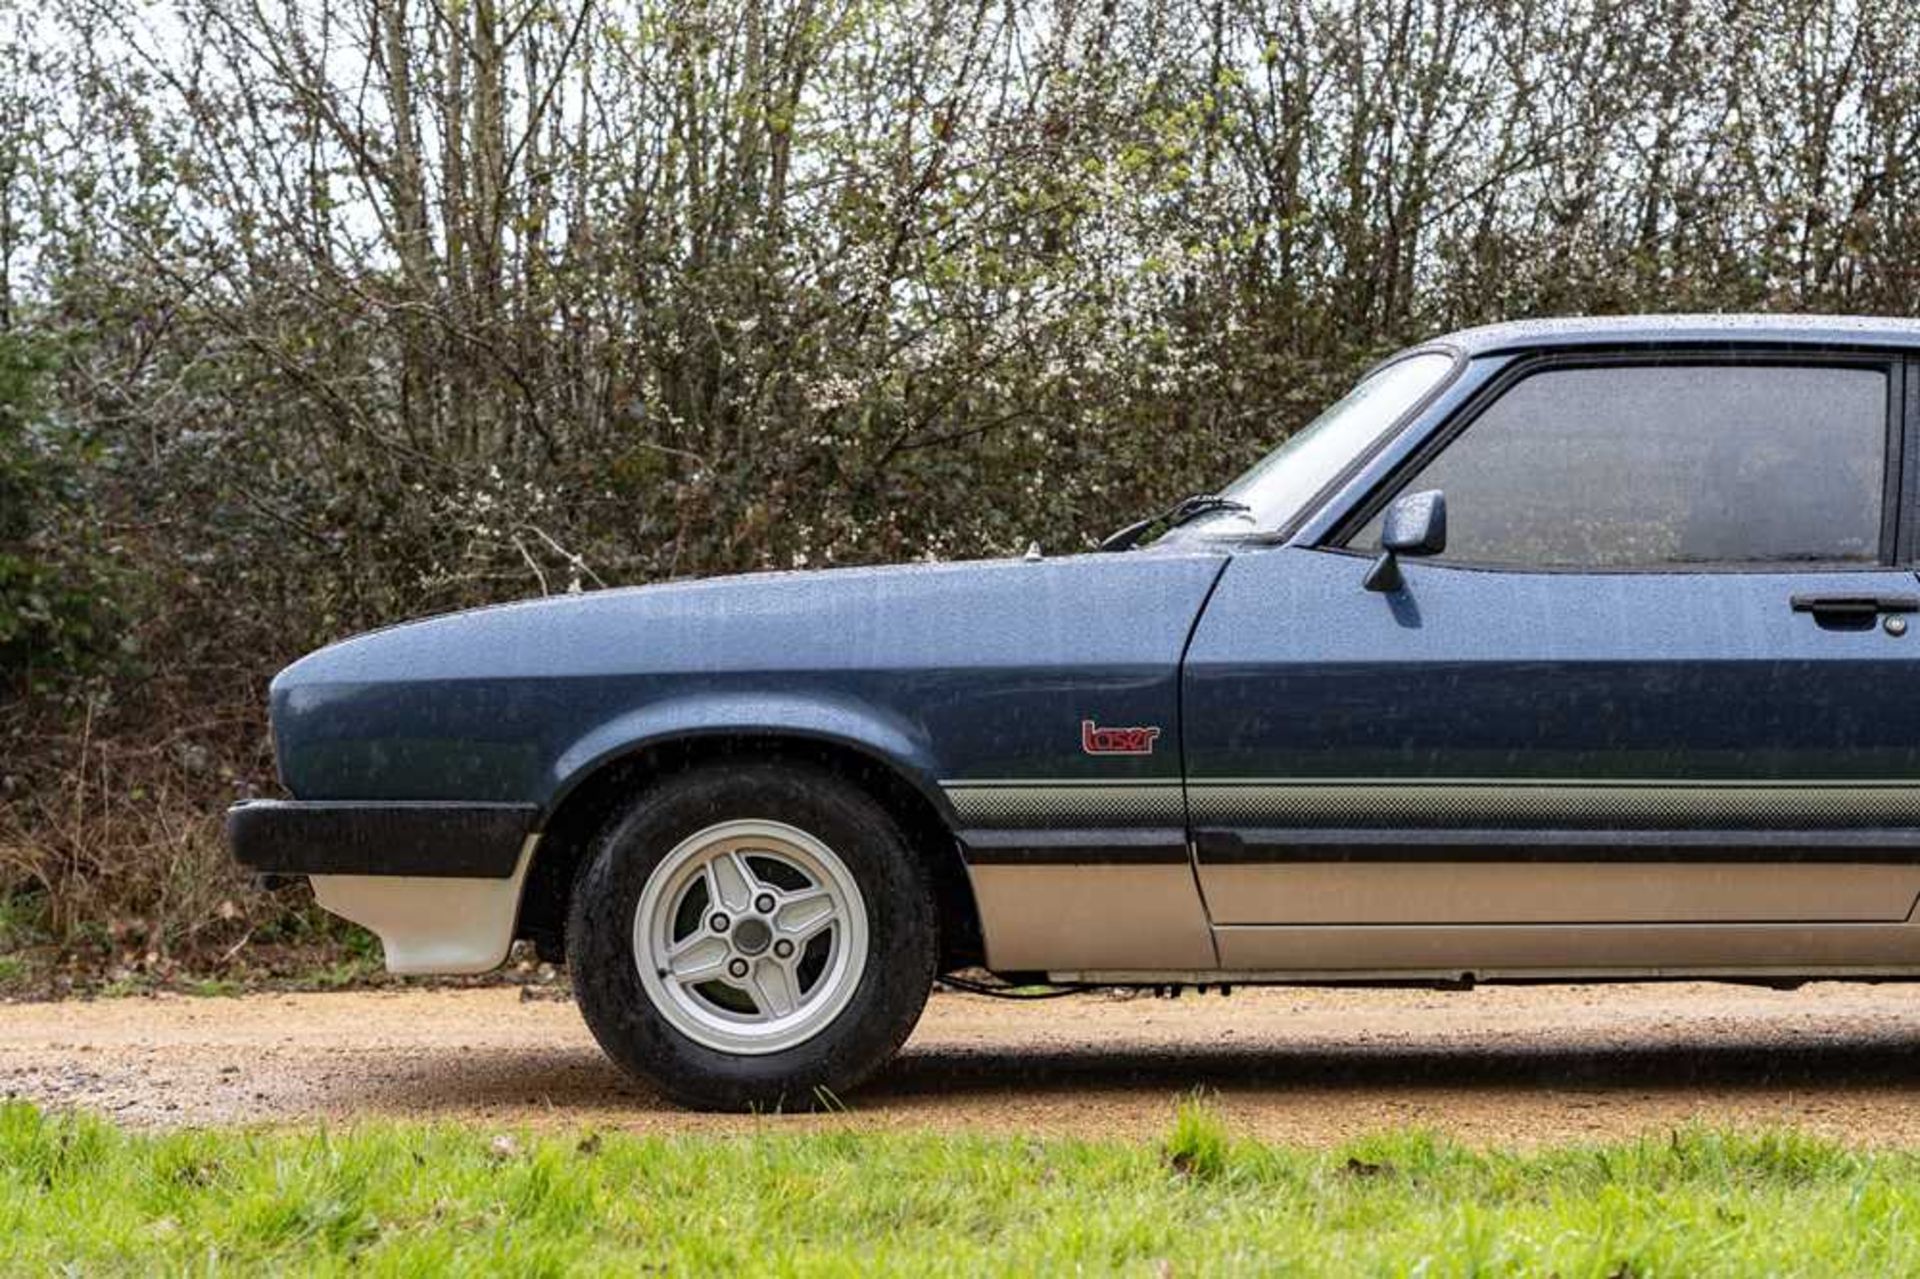 1985 Ford Capri Laser 2.0 Litre Warranted 55,300 miles from new - Image 14 of 67